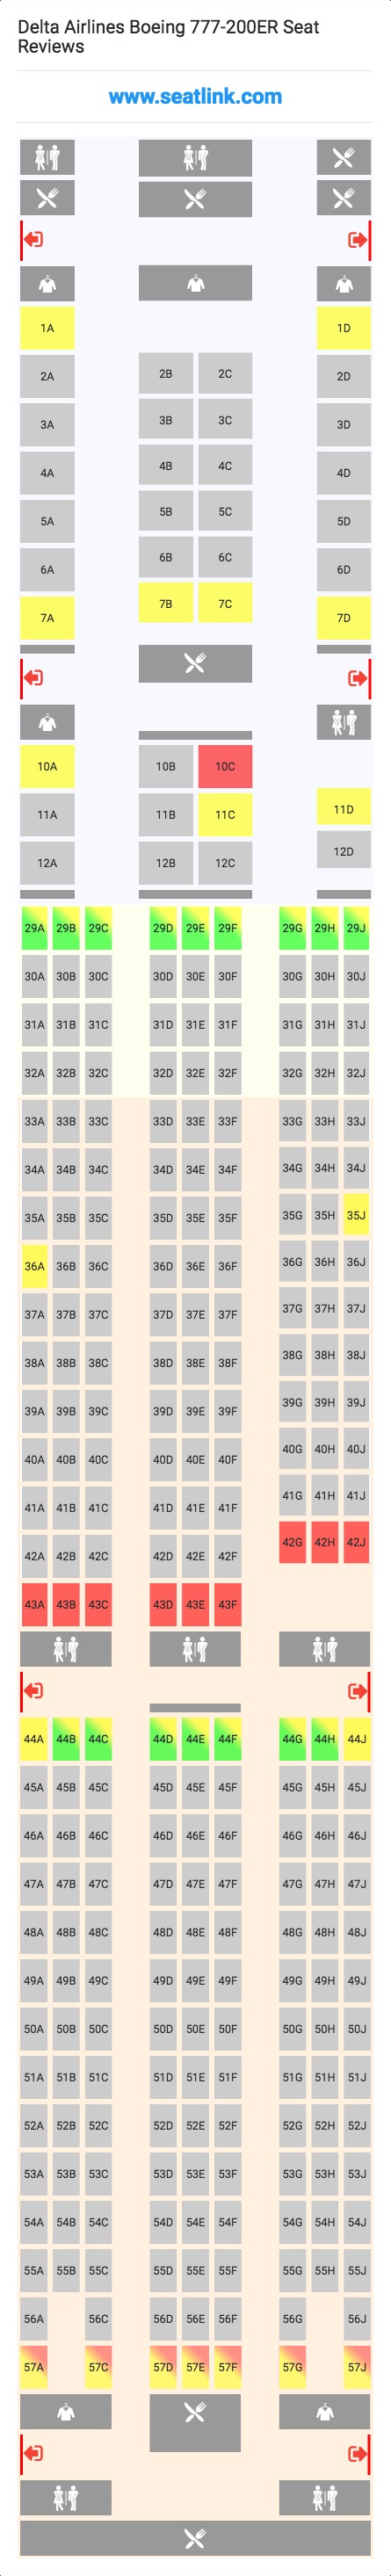 Delta Airlines Boeing 777-200ER (777) Seat Map